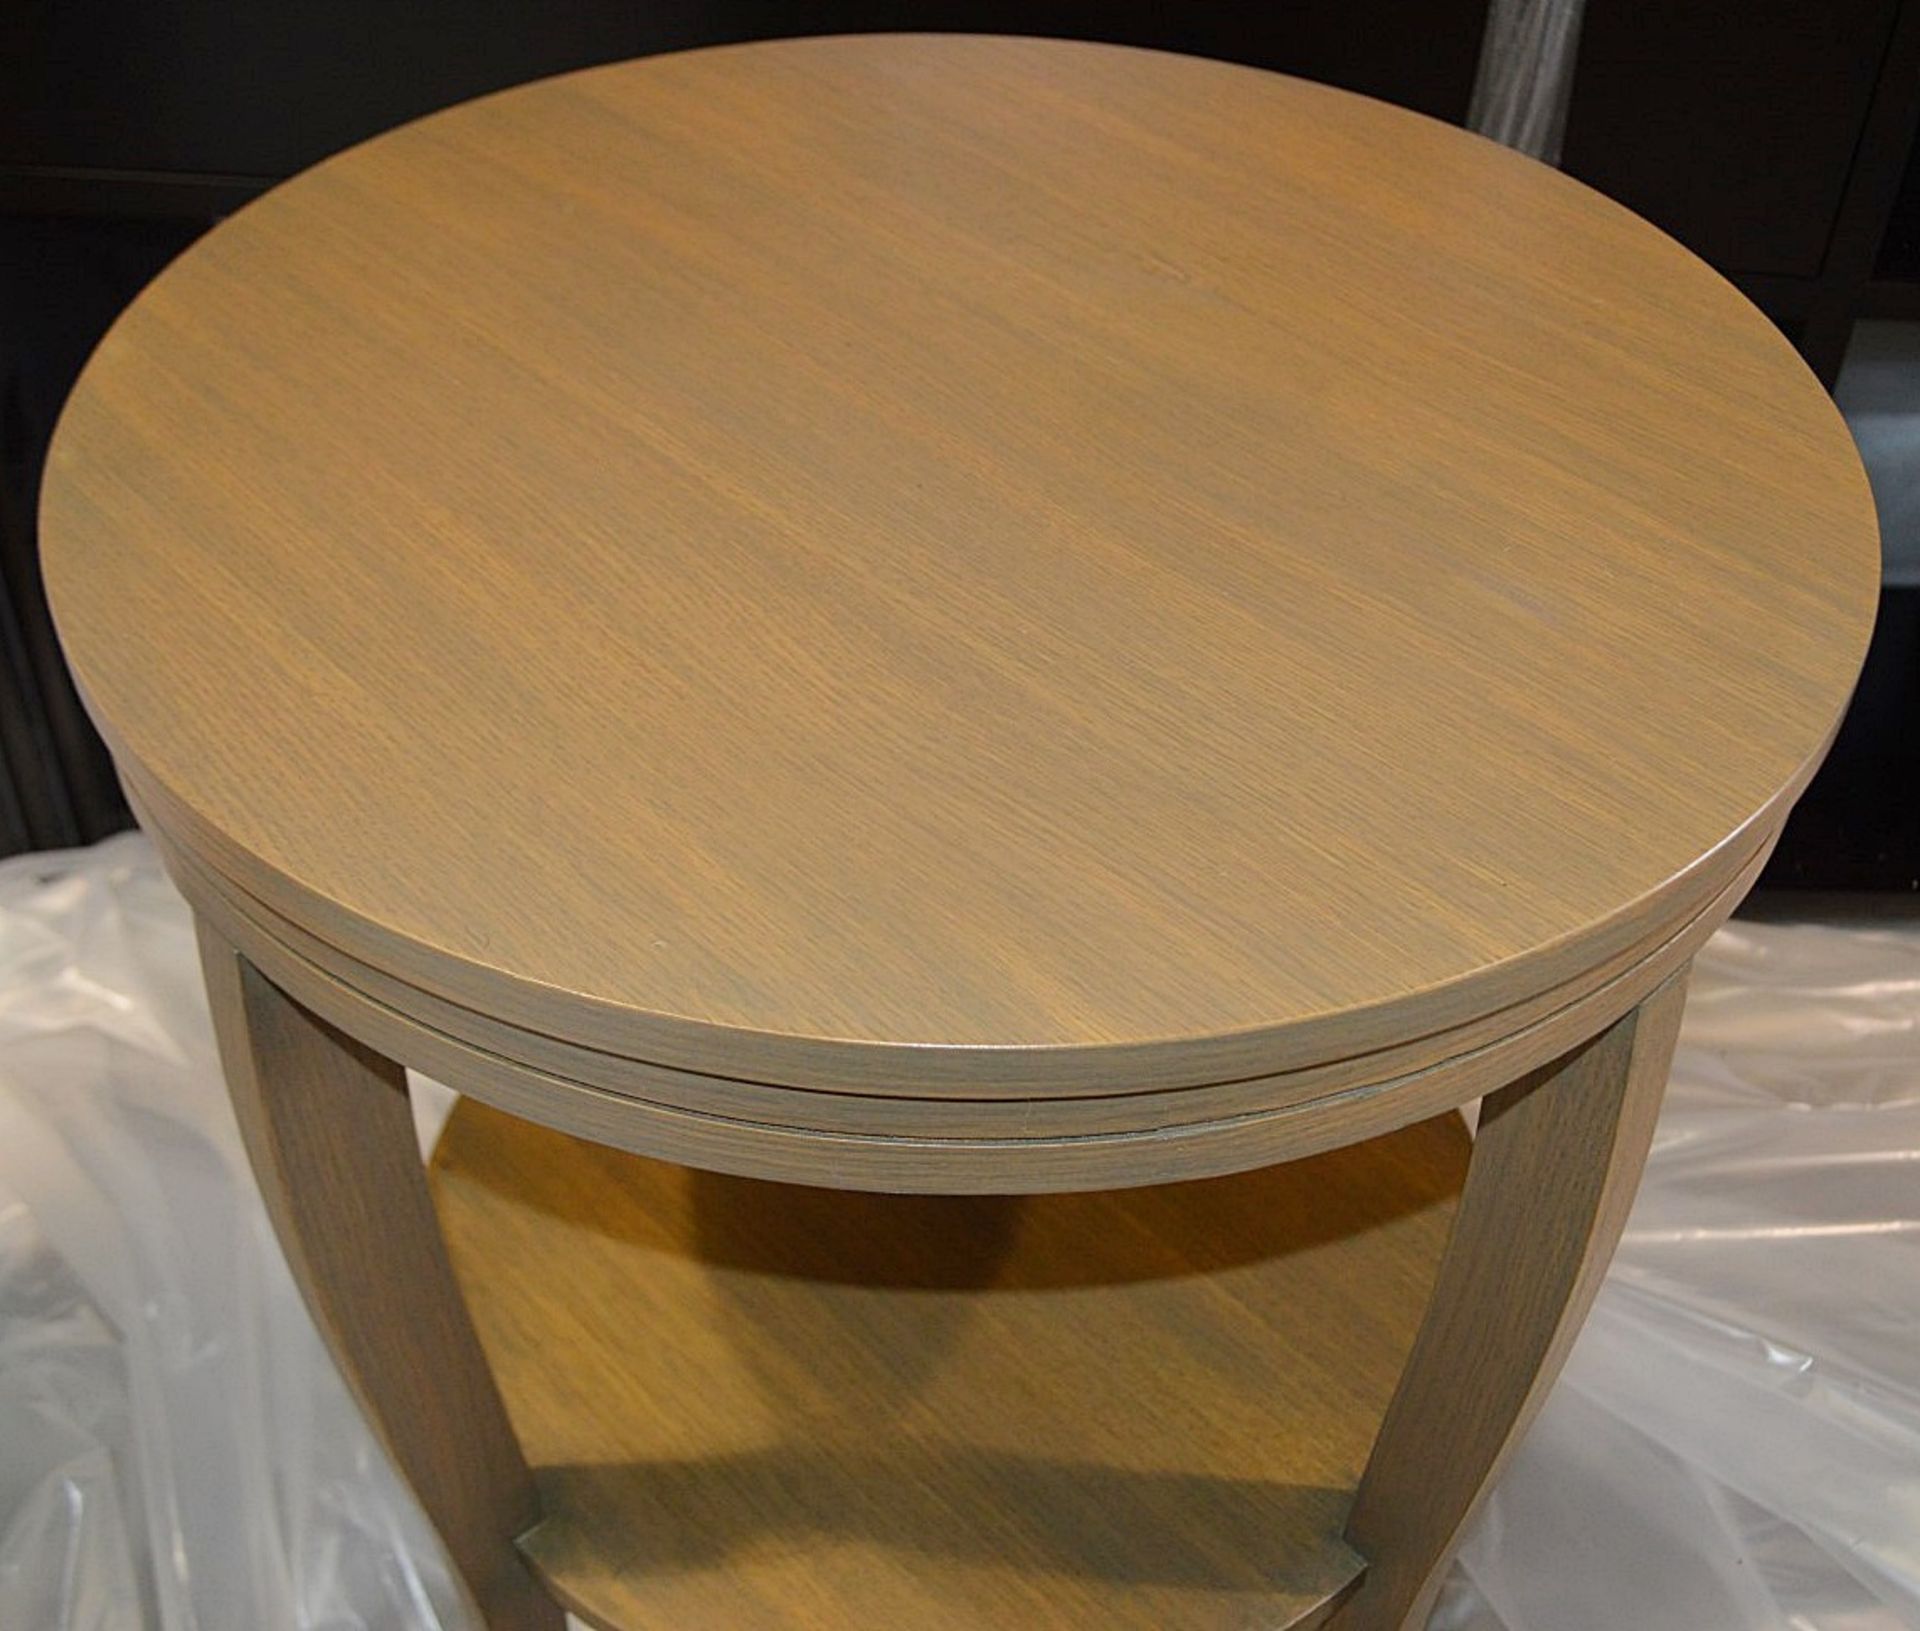 1 x JUSTIN VAN BREDA 'Monroe' Designer Occasional Table In Stained Oak Finish - Image 2 of 6